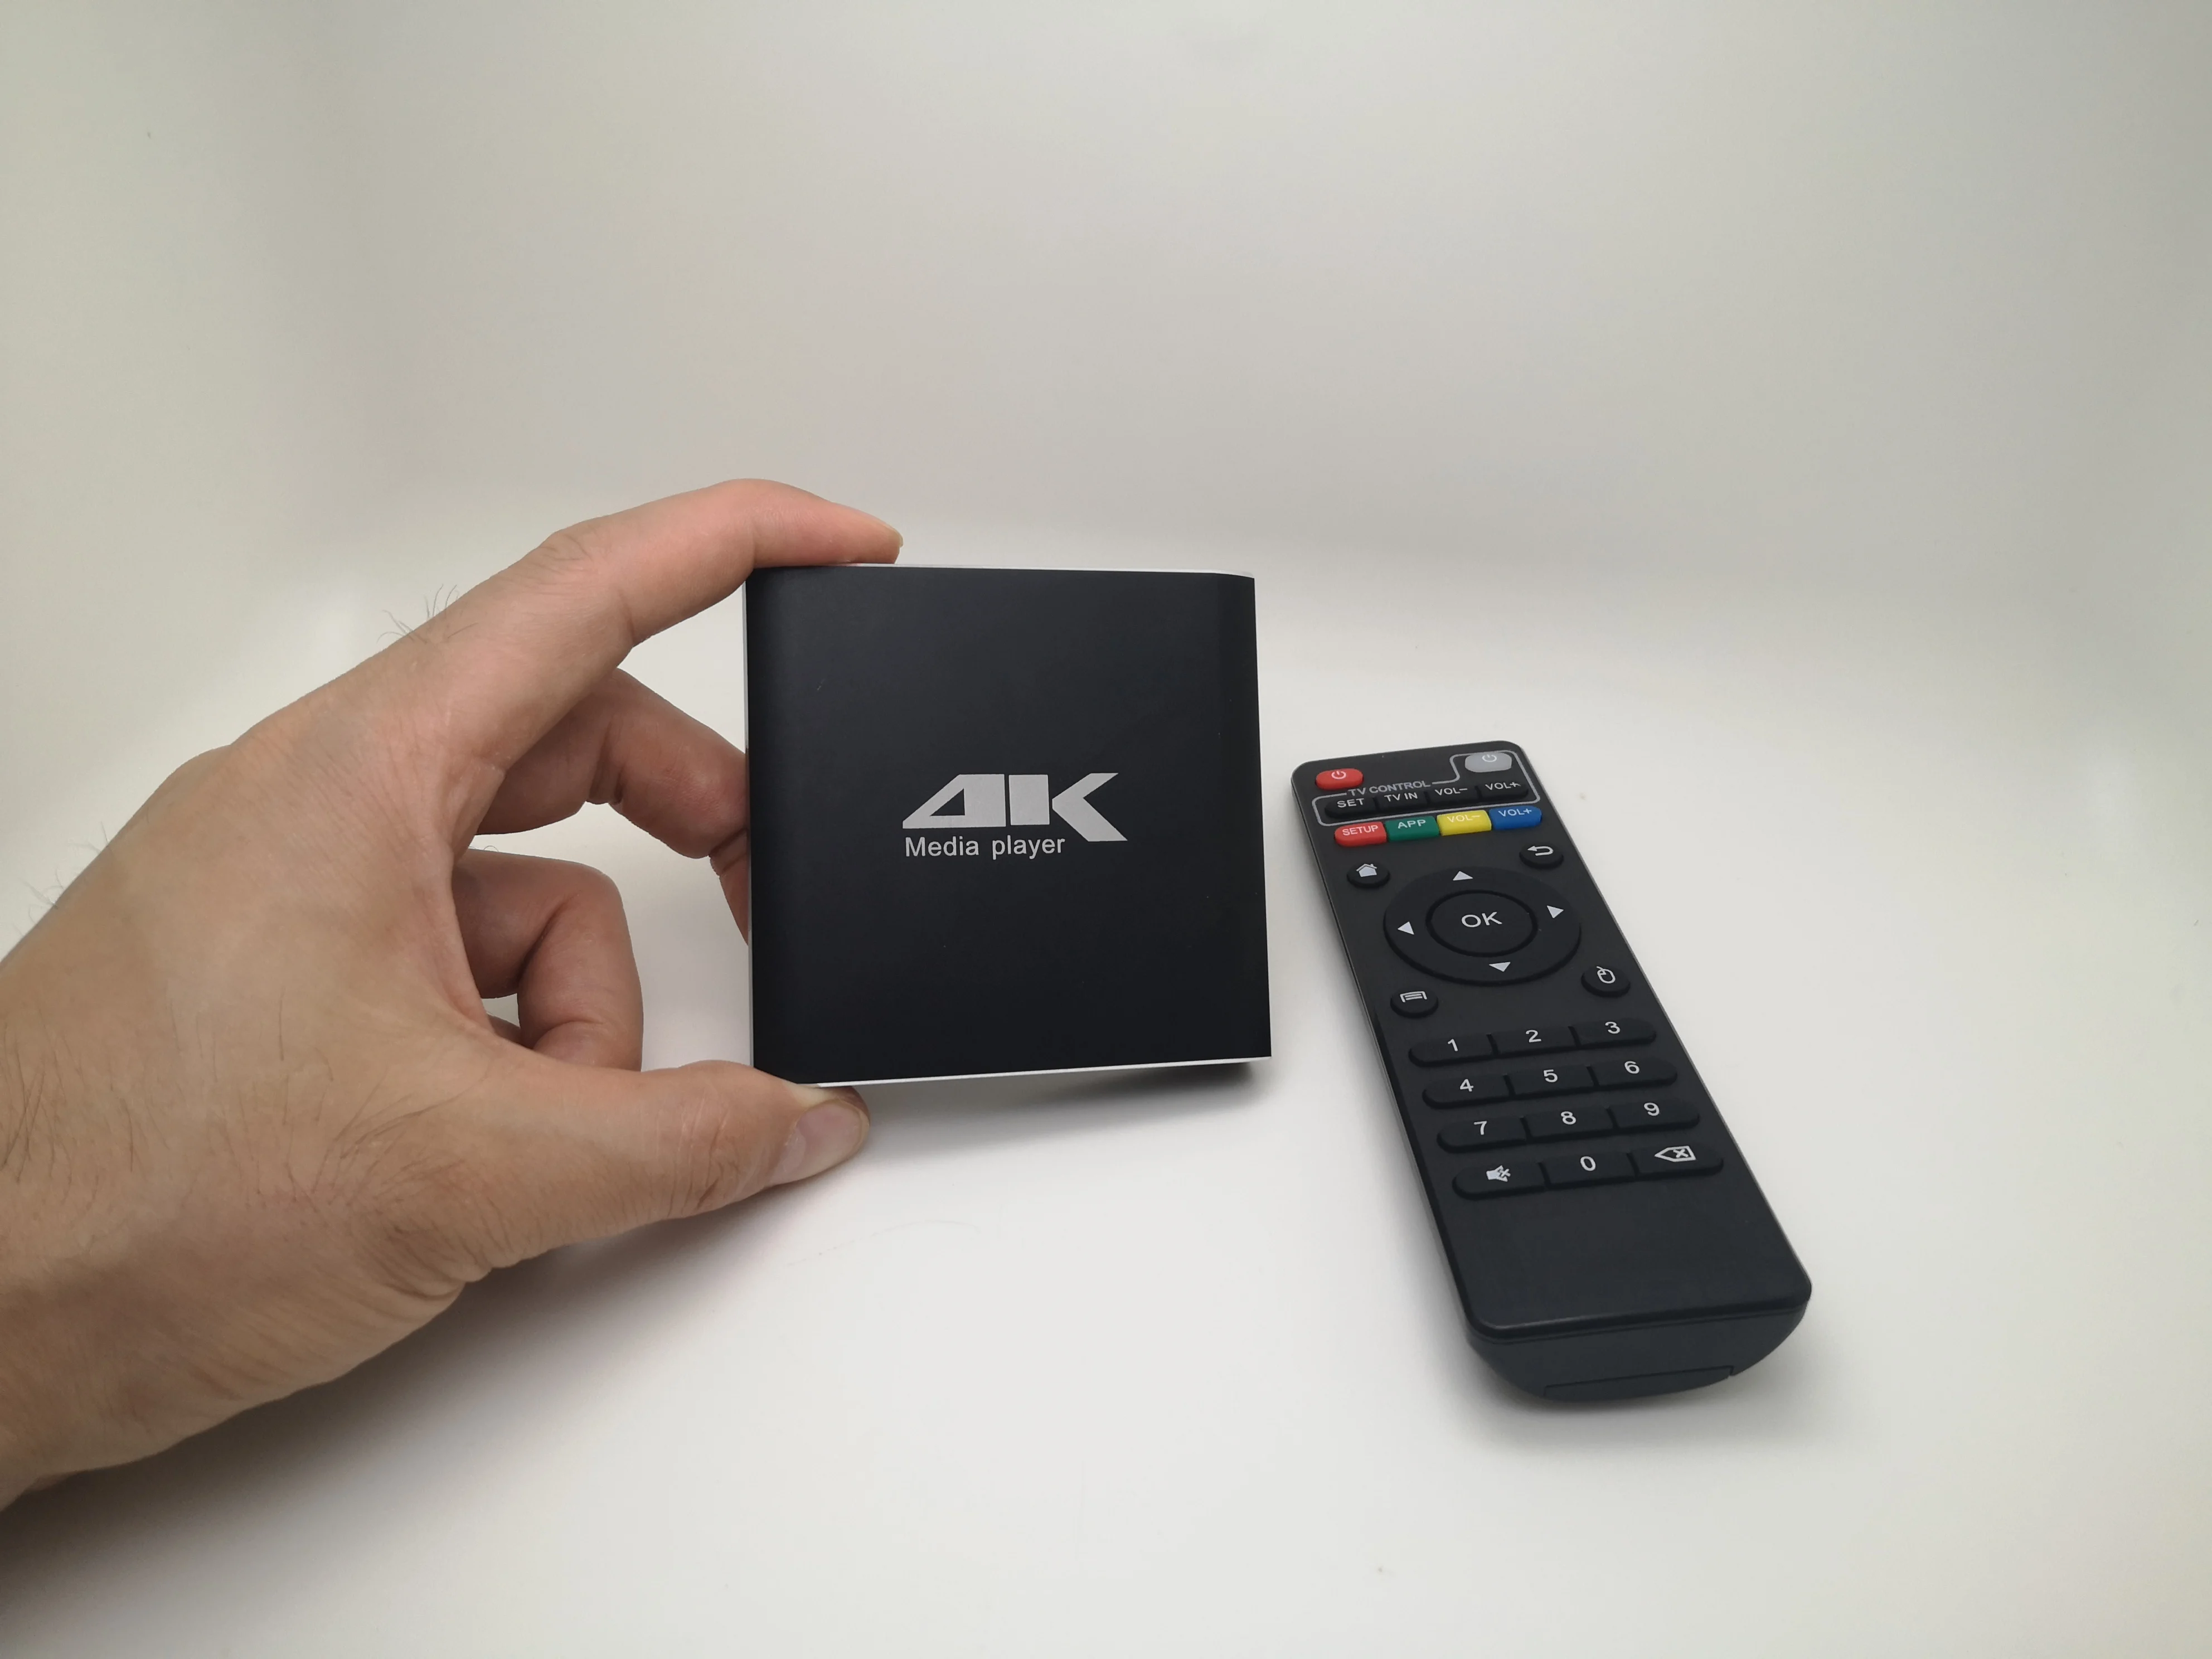 JEDX MP029 MINI 4K Full HD 1080P Media Player with SD/USB/HDMI AV/Auto play Support 4K UHK H.265/H.264/VP9 up to 60fps